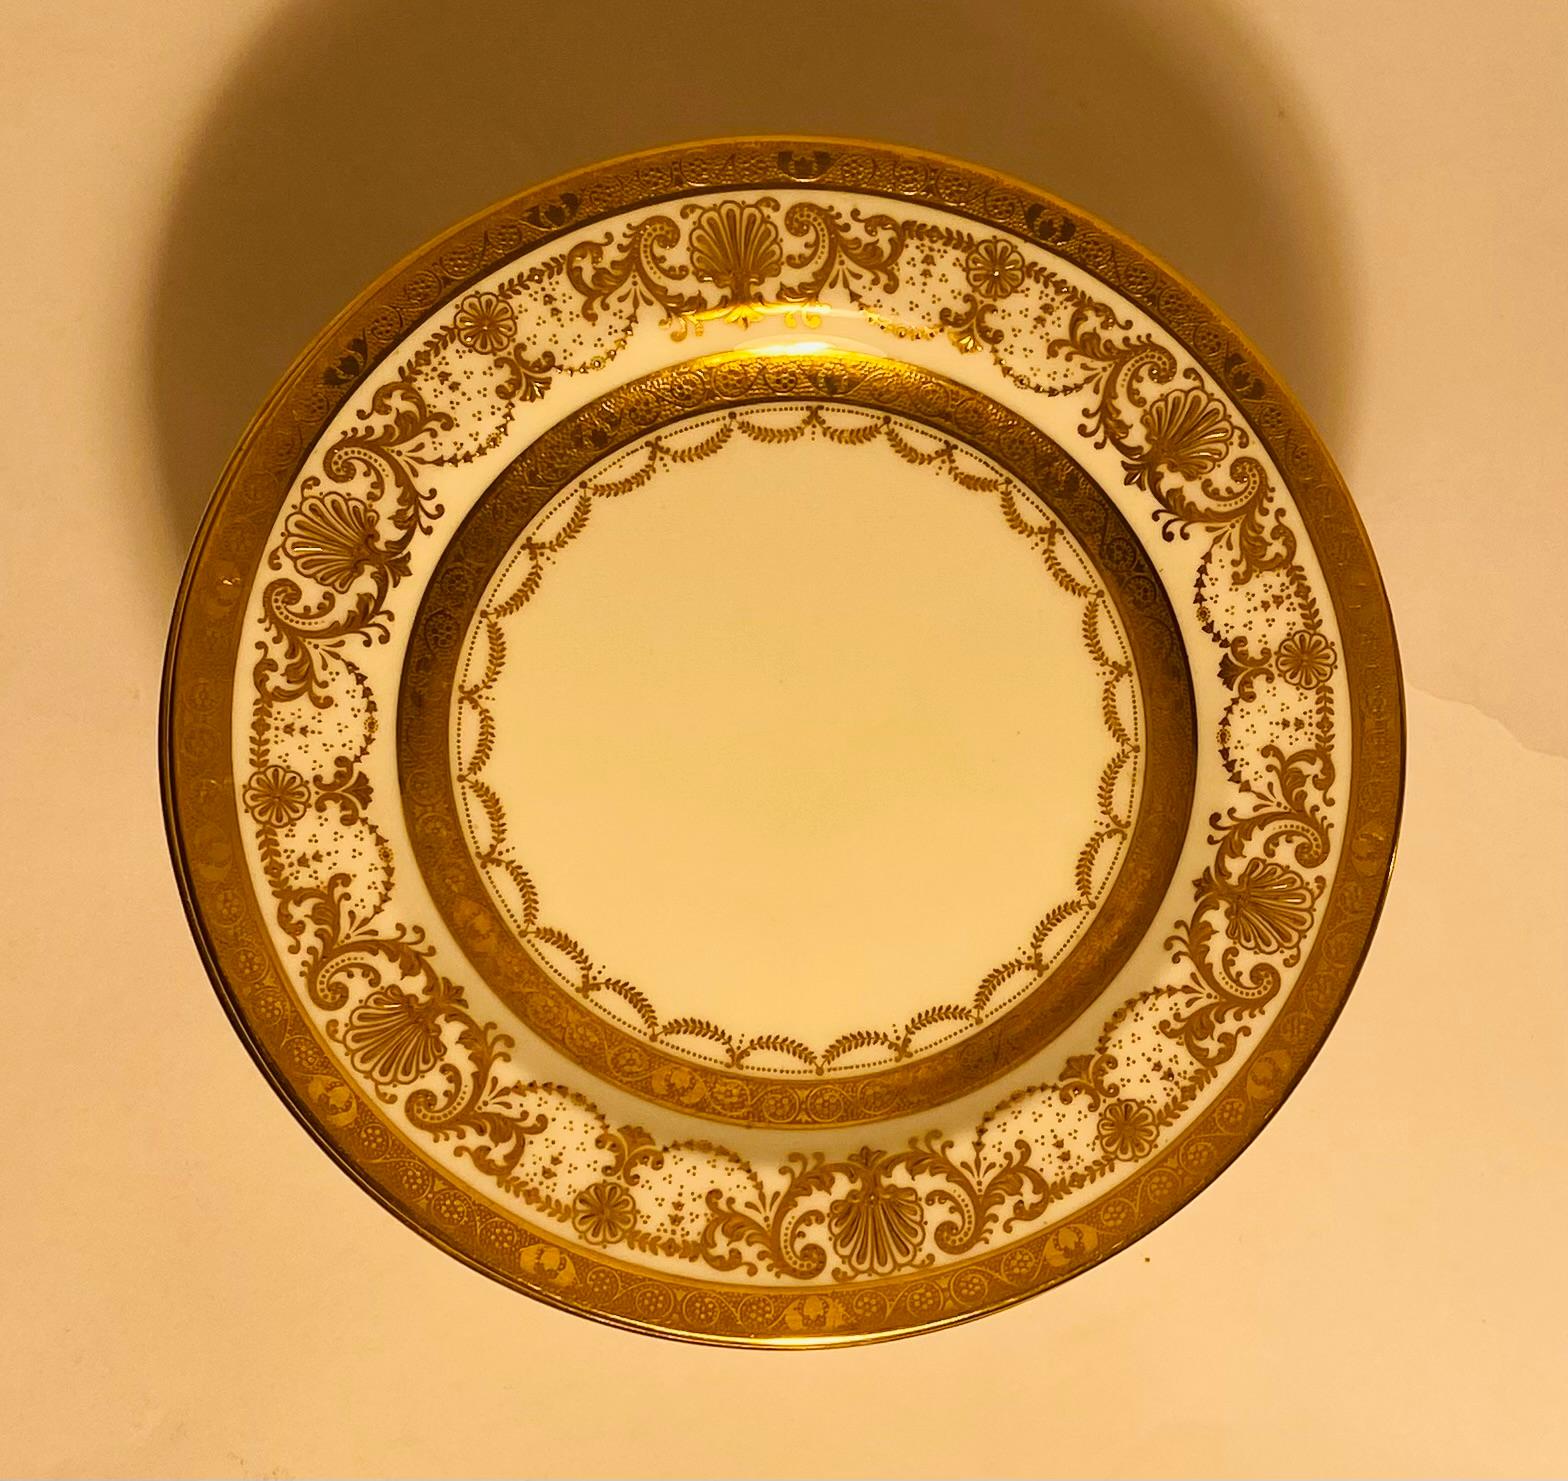 Hand-Crafted 12 Antique English Raised Gilt Encrusted Salad or Dessert Plates Circa 1910 For Sale